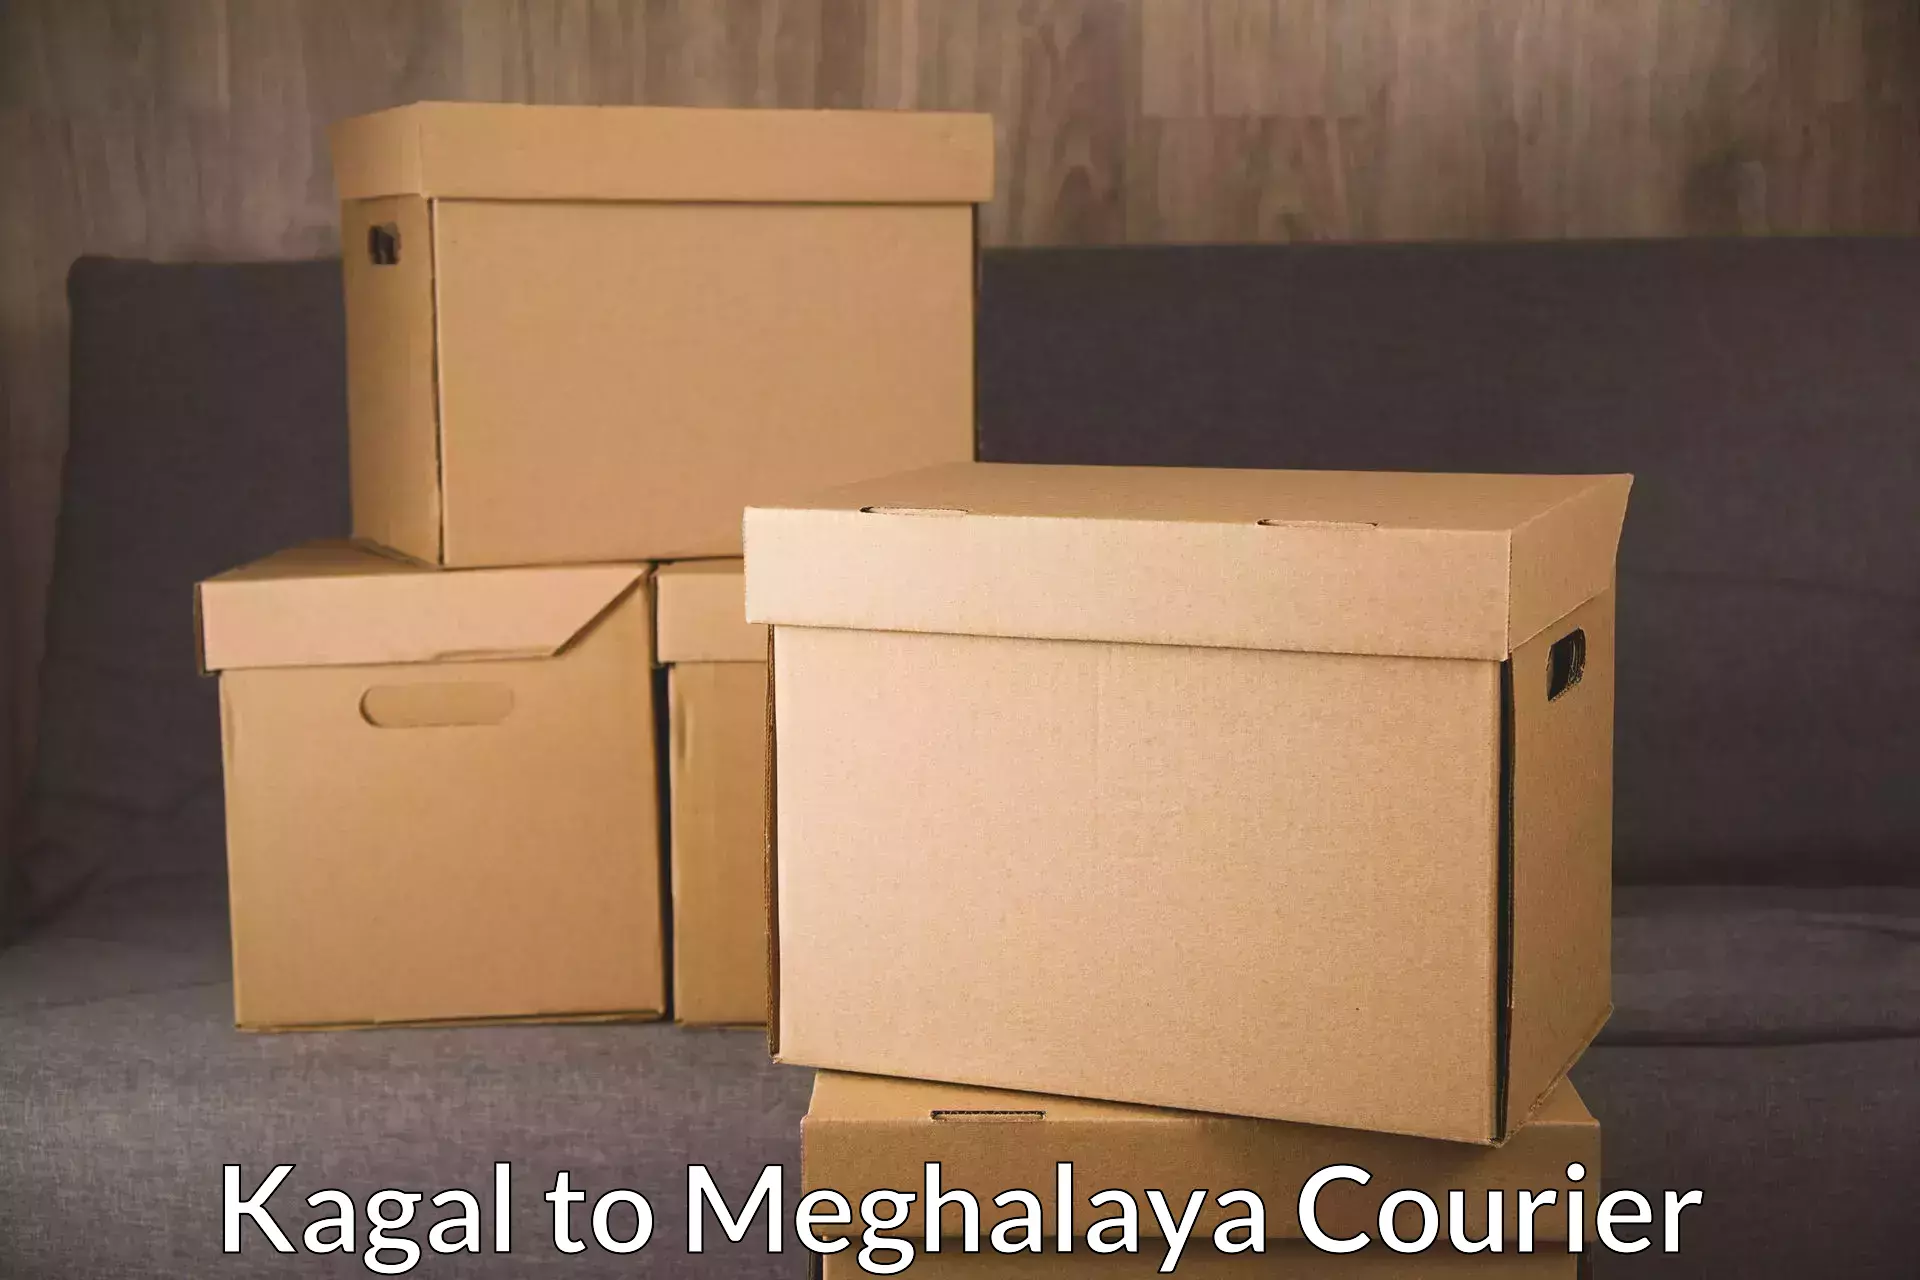 Round-the-clock parcel delivery Kagal to Cherrapunji